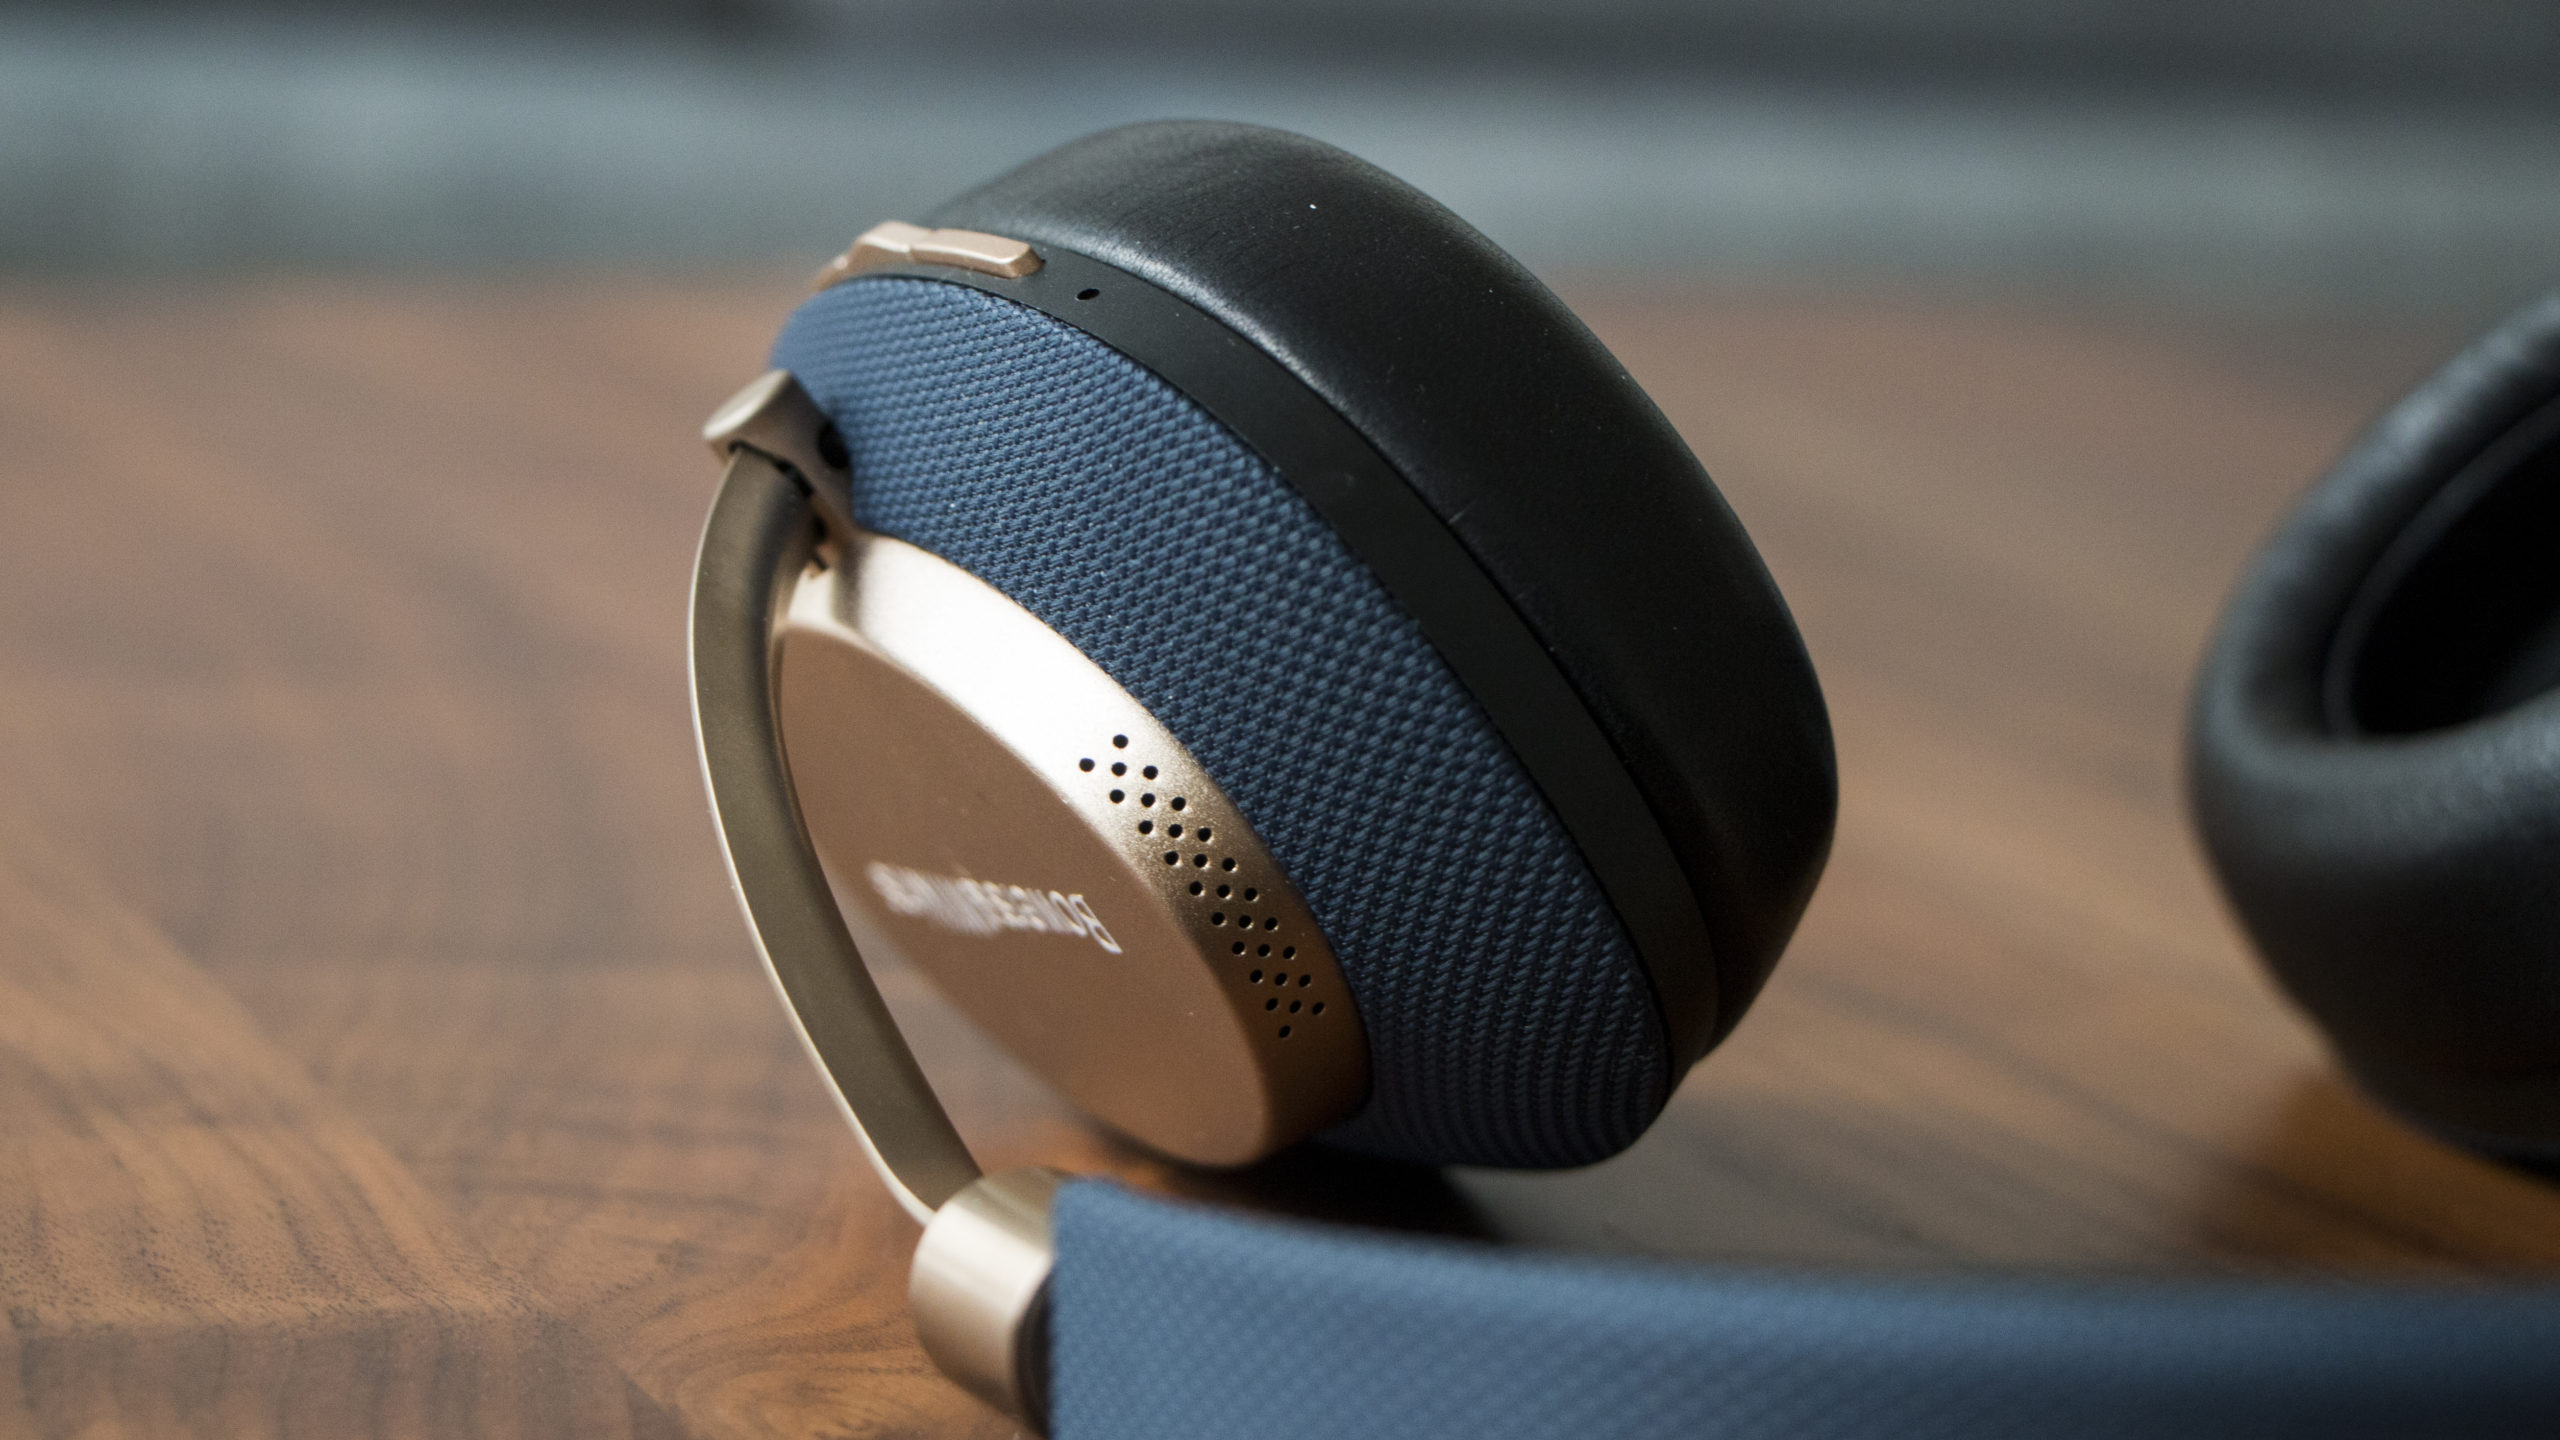 Bowers & Wilkins’ PX Noise-Cancelling Wireless Headphones Blew My Mind